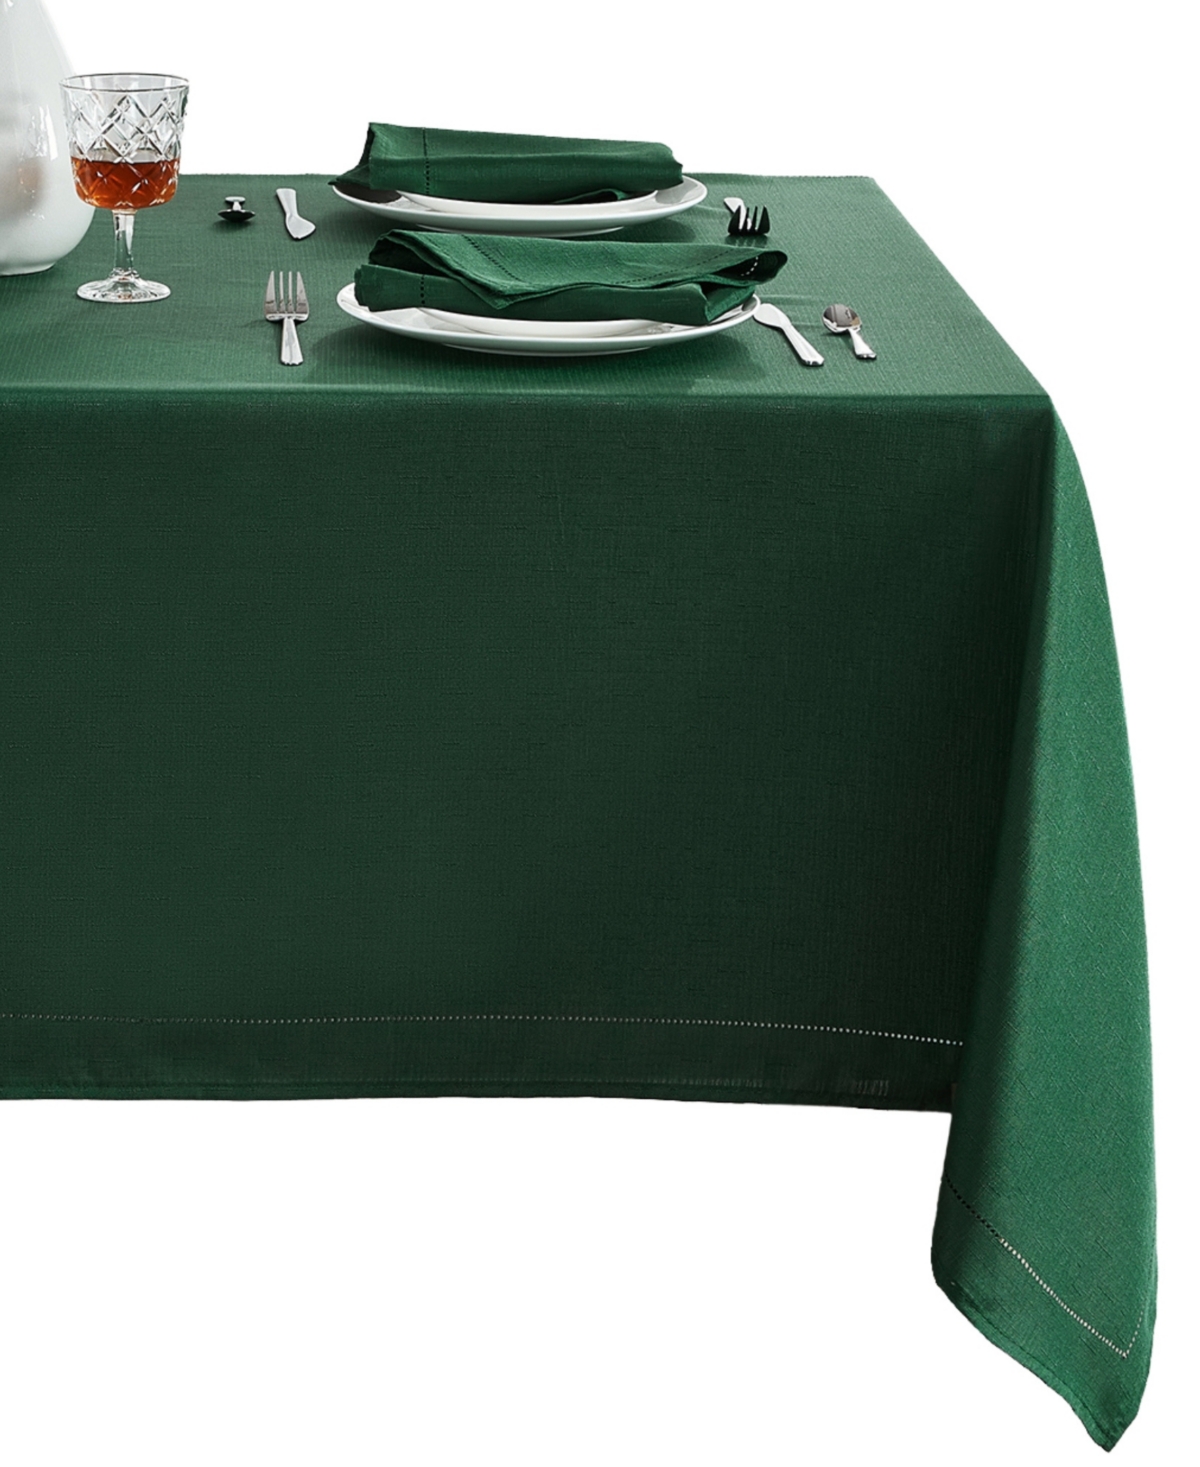 Elrene Alison Eyelet Punched Border Fabric Tablecloth, 60" X 84" In Forest